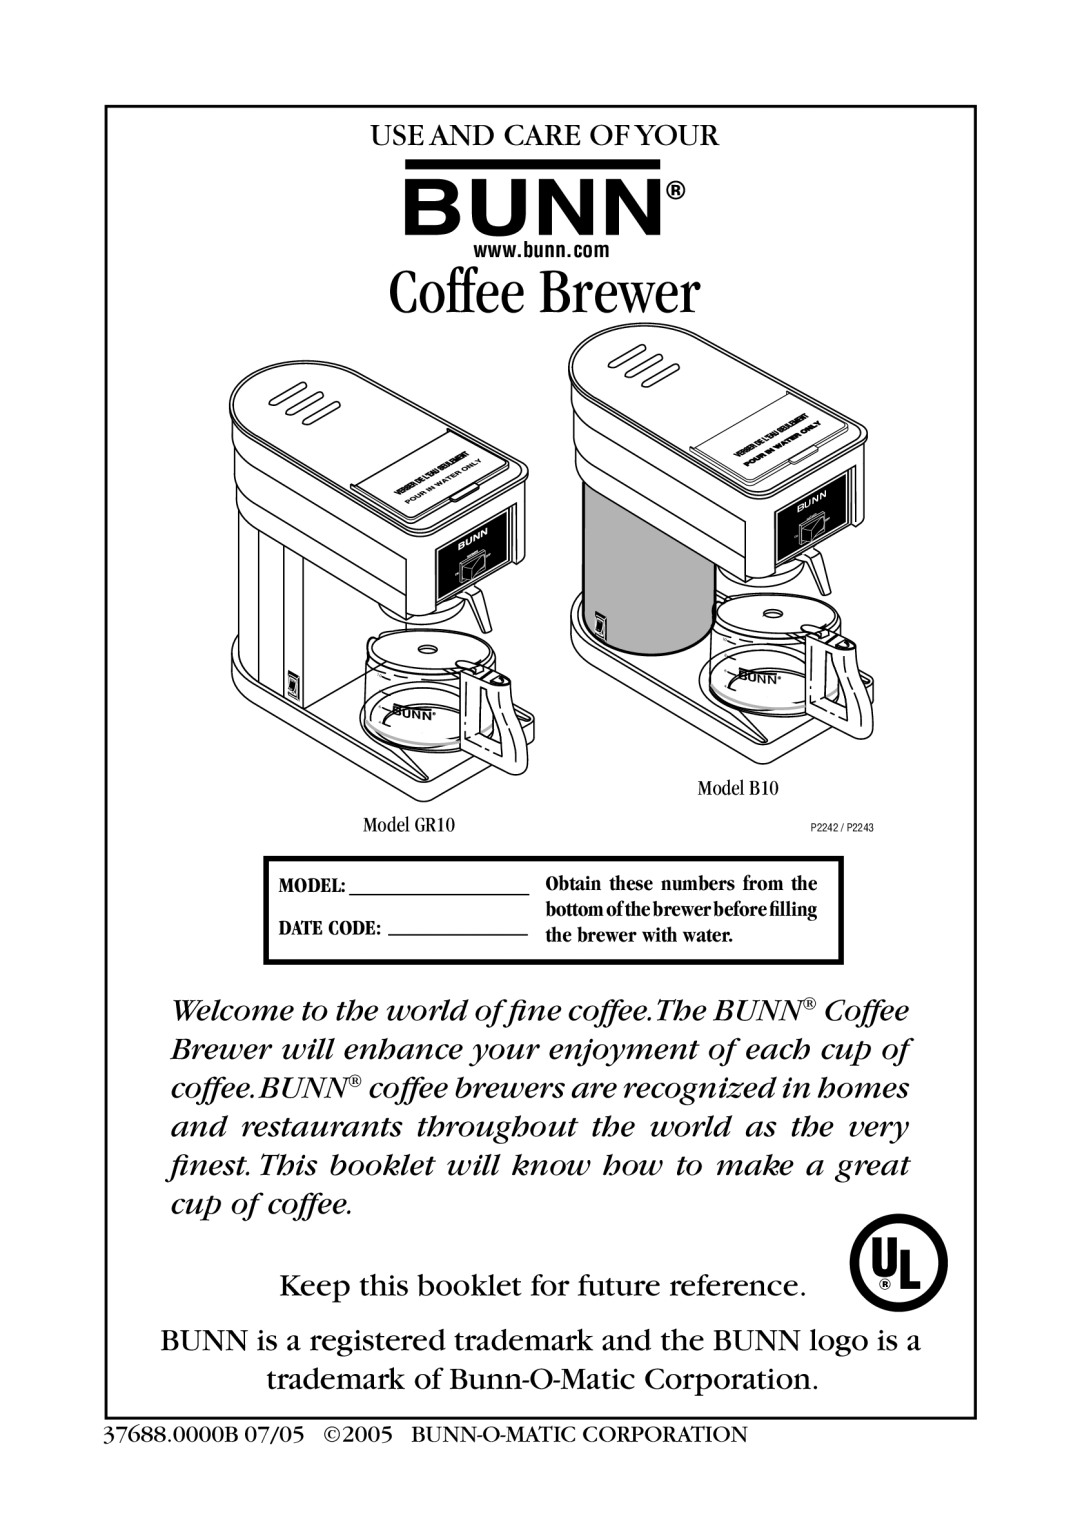 Bunn GR10 Series, GR10-B manual Use And Care Of Your, Keep this booklet for future reference, Corporation, Coffee Brewer 